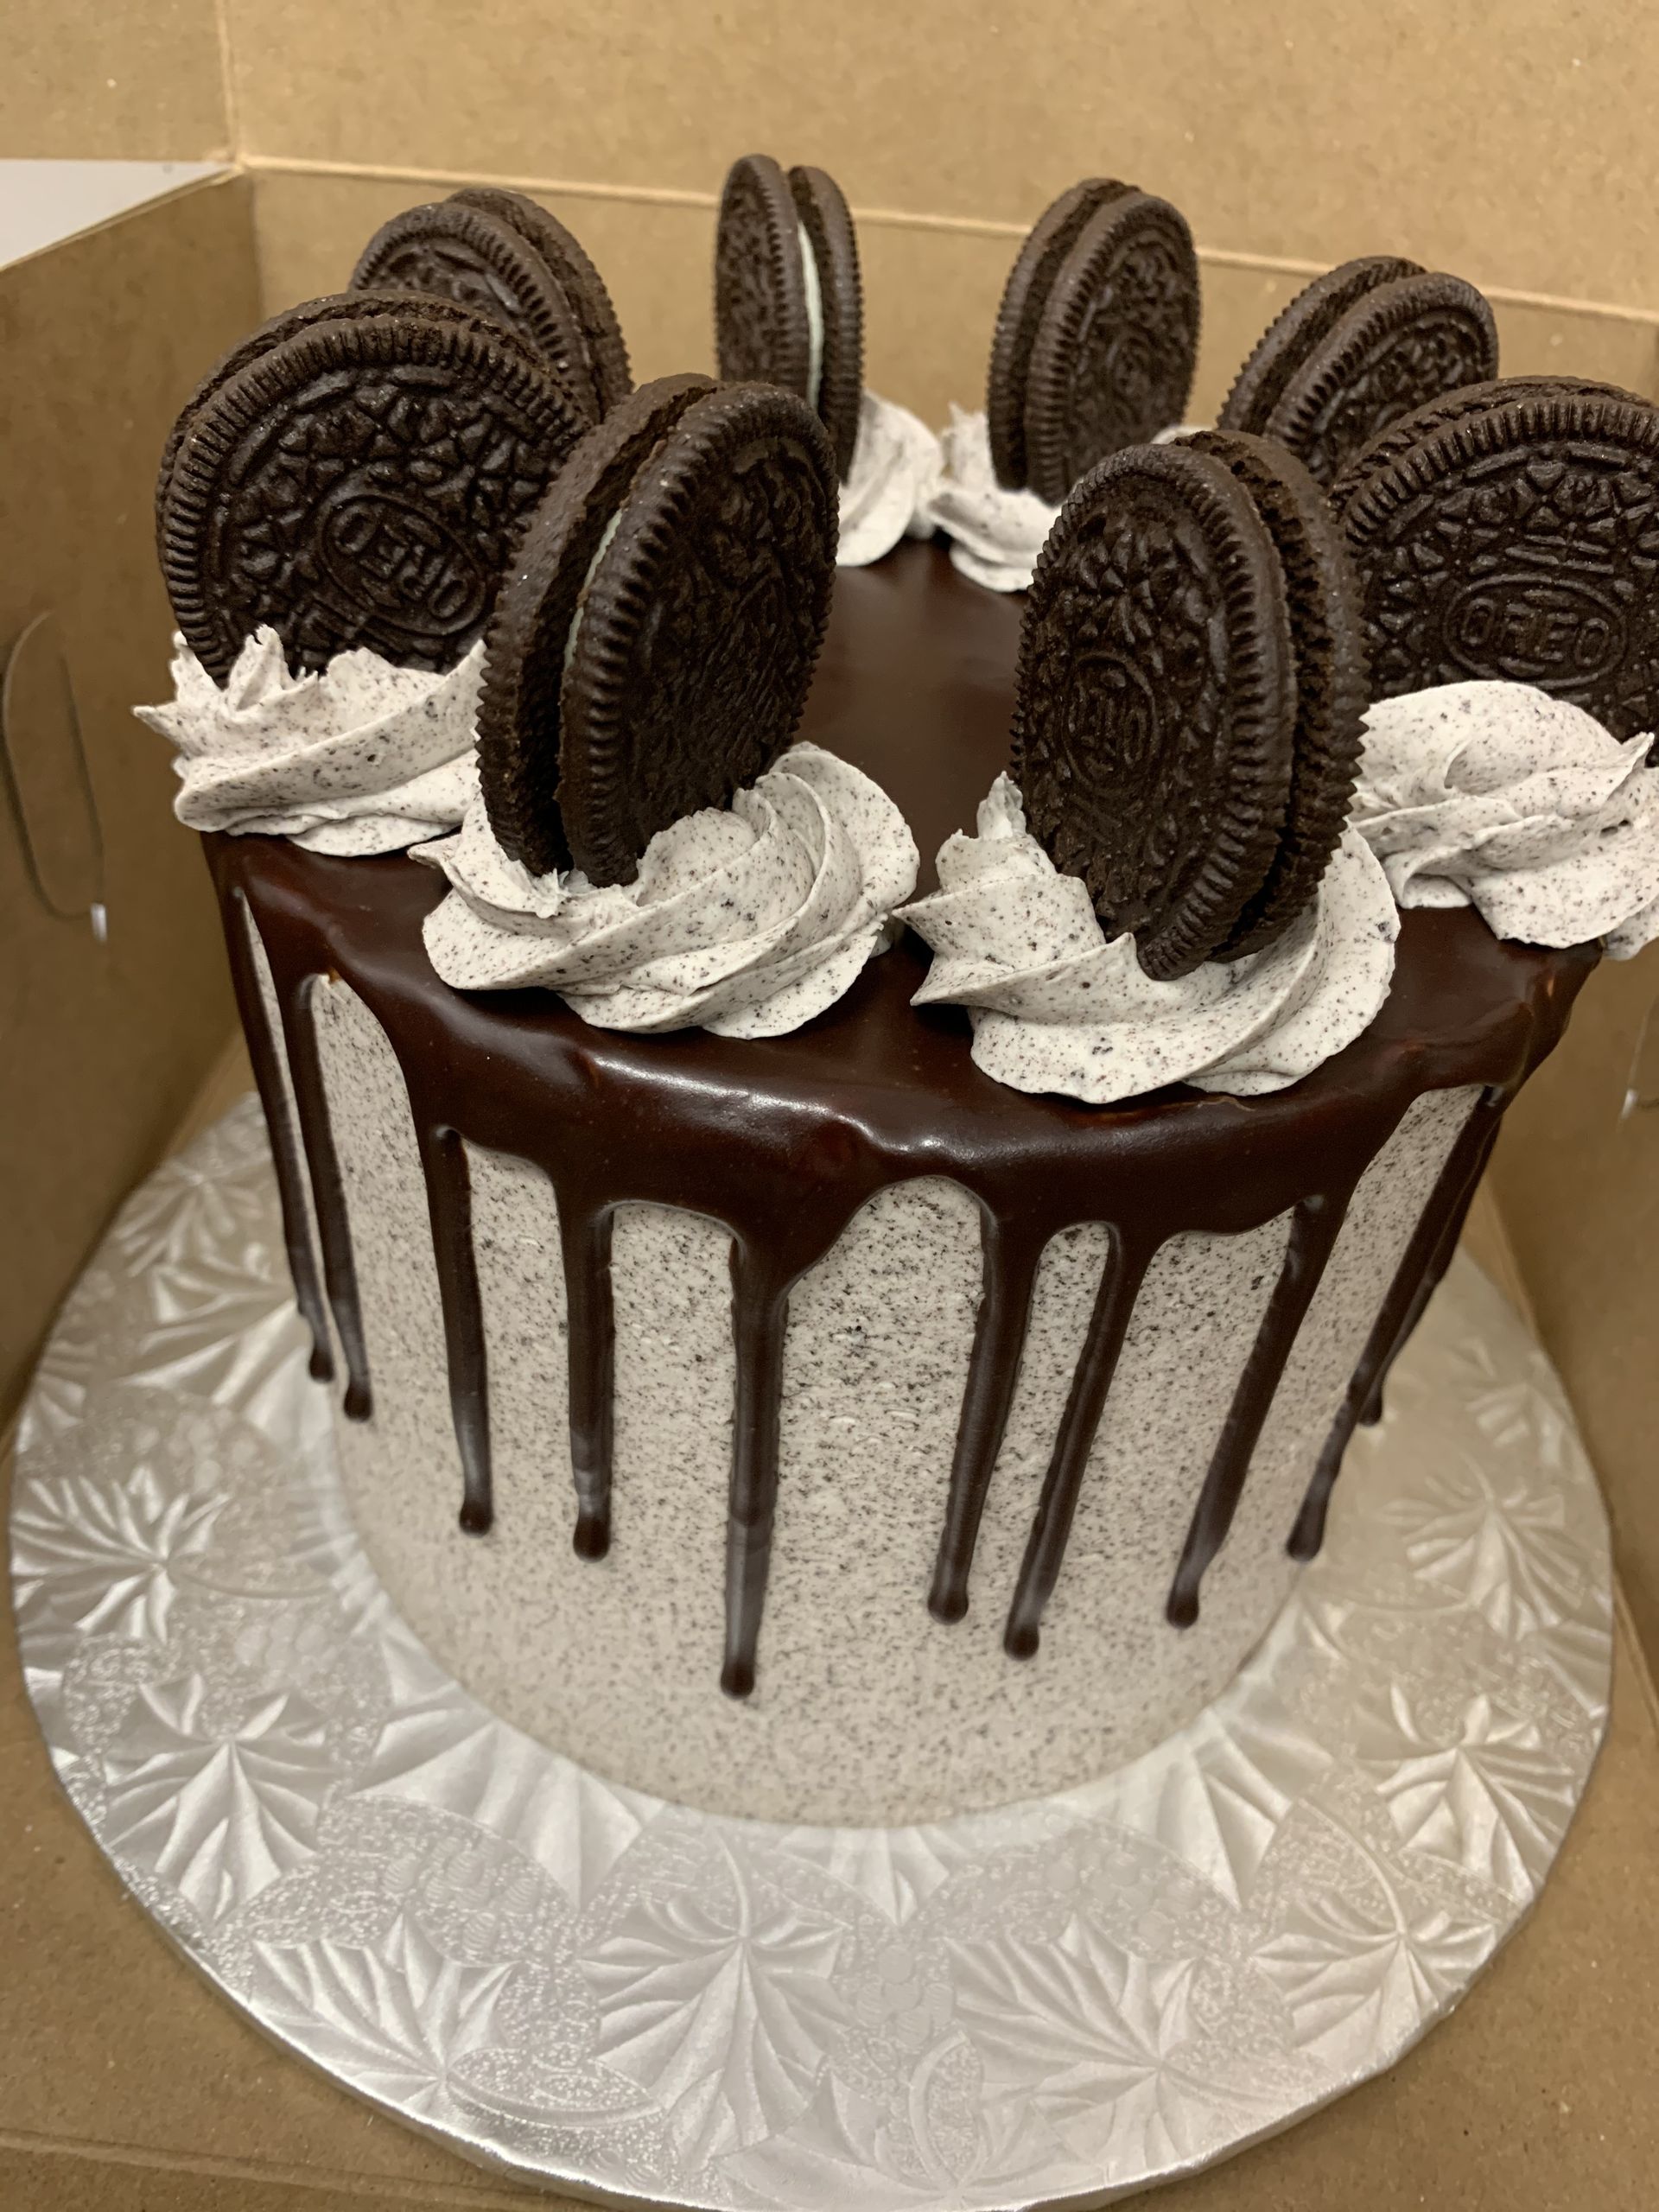 a cake with chocolate frosting and oreos on top